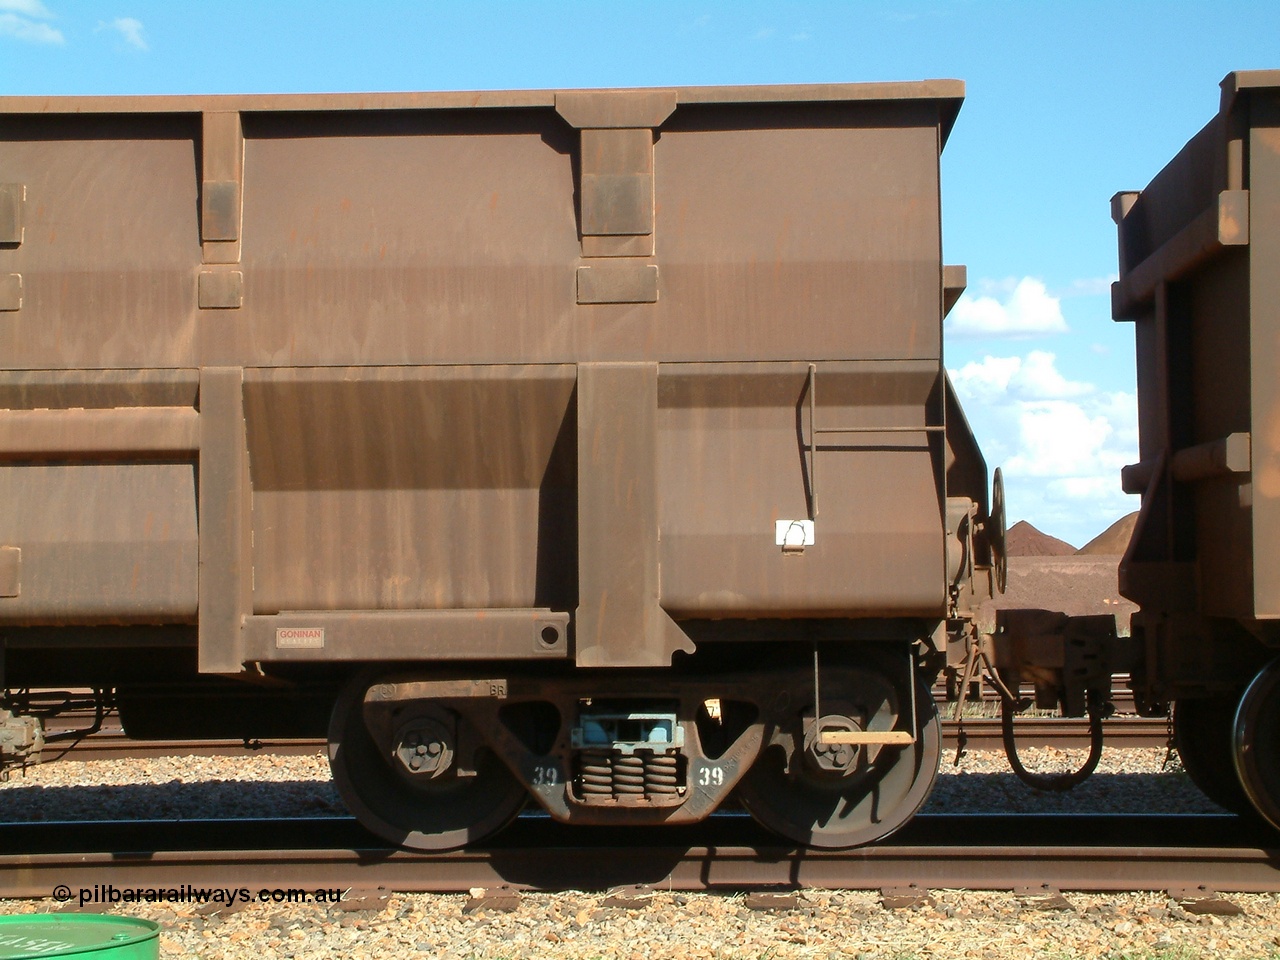 040412 144513
Nelson Point, Goninan built, Lynx Engineering designed ore waggon known as Golynx waggons, one of 345 such waggons constructed during 2001 out of 3CR12 stainless steel in an effort to eliminate painting and to reduce wear on the waggon body. 12th April 2004.
Keywords: Goninan-WA;Golynx;BHP-ore-waggon;